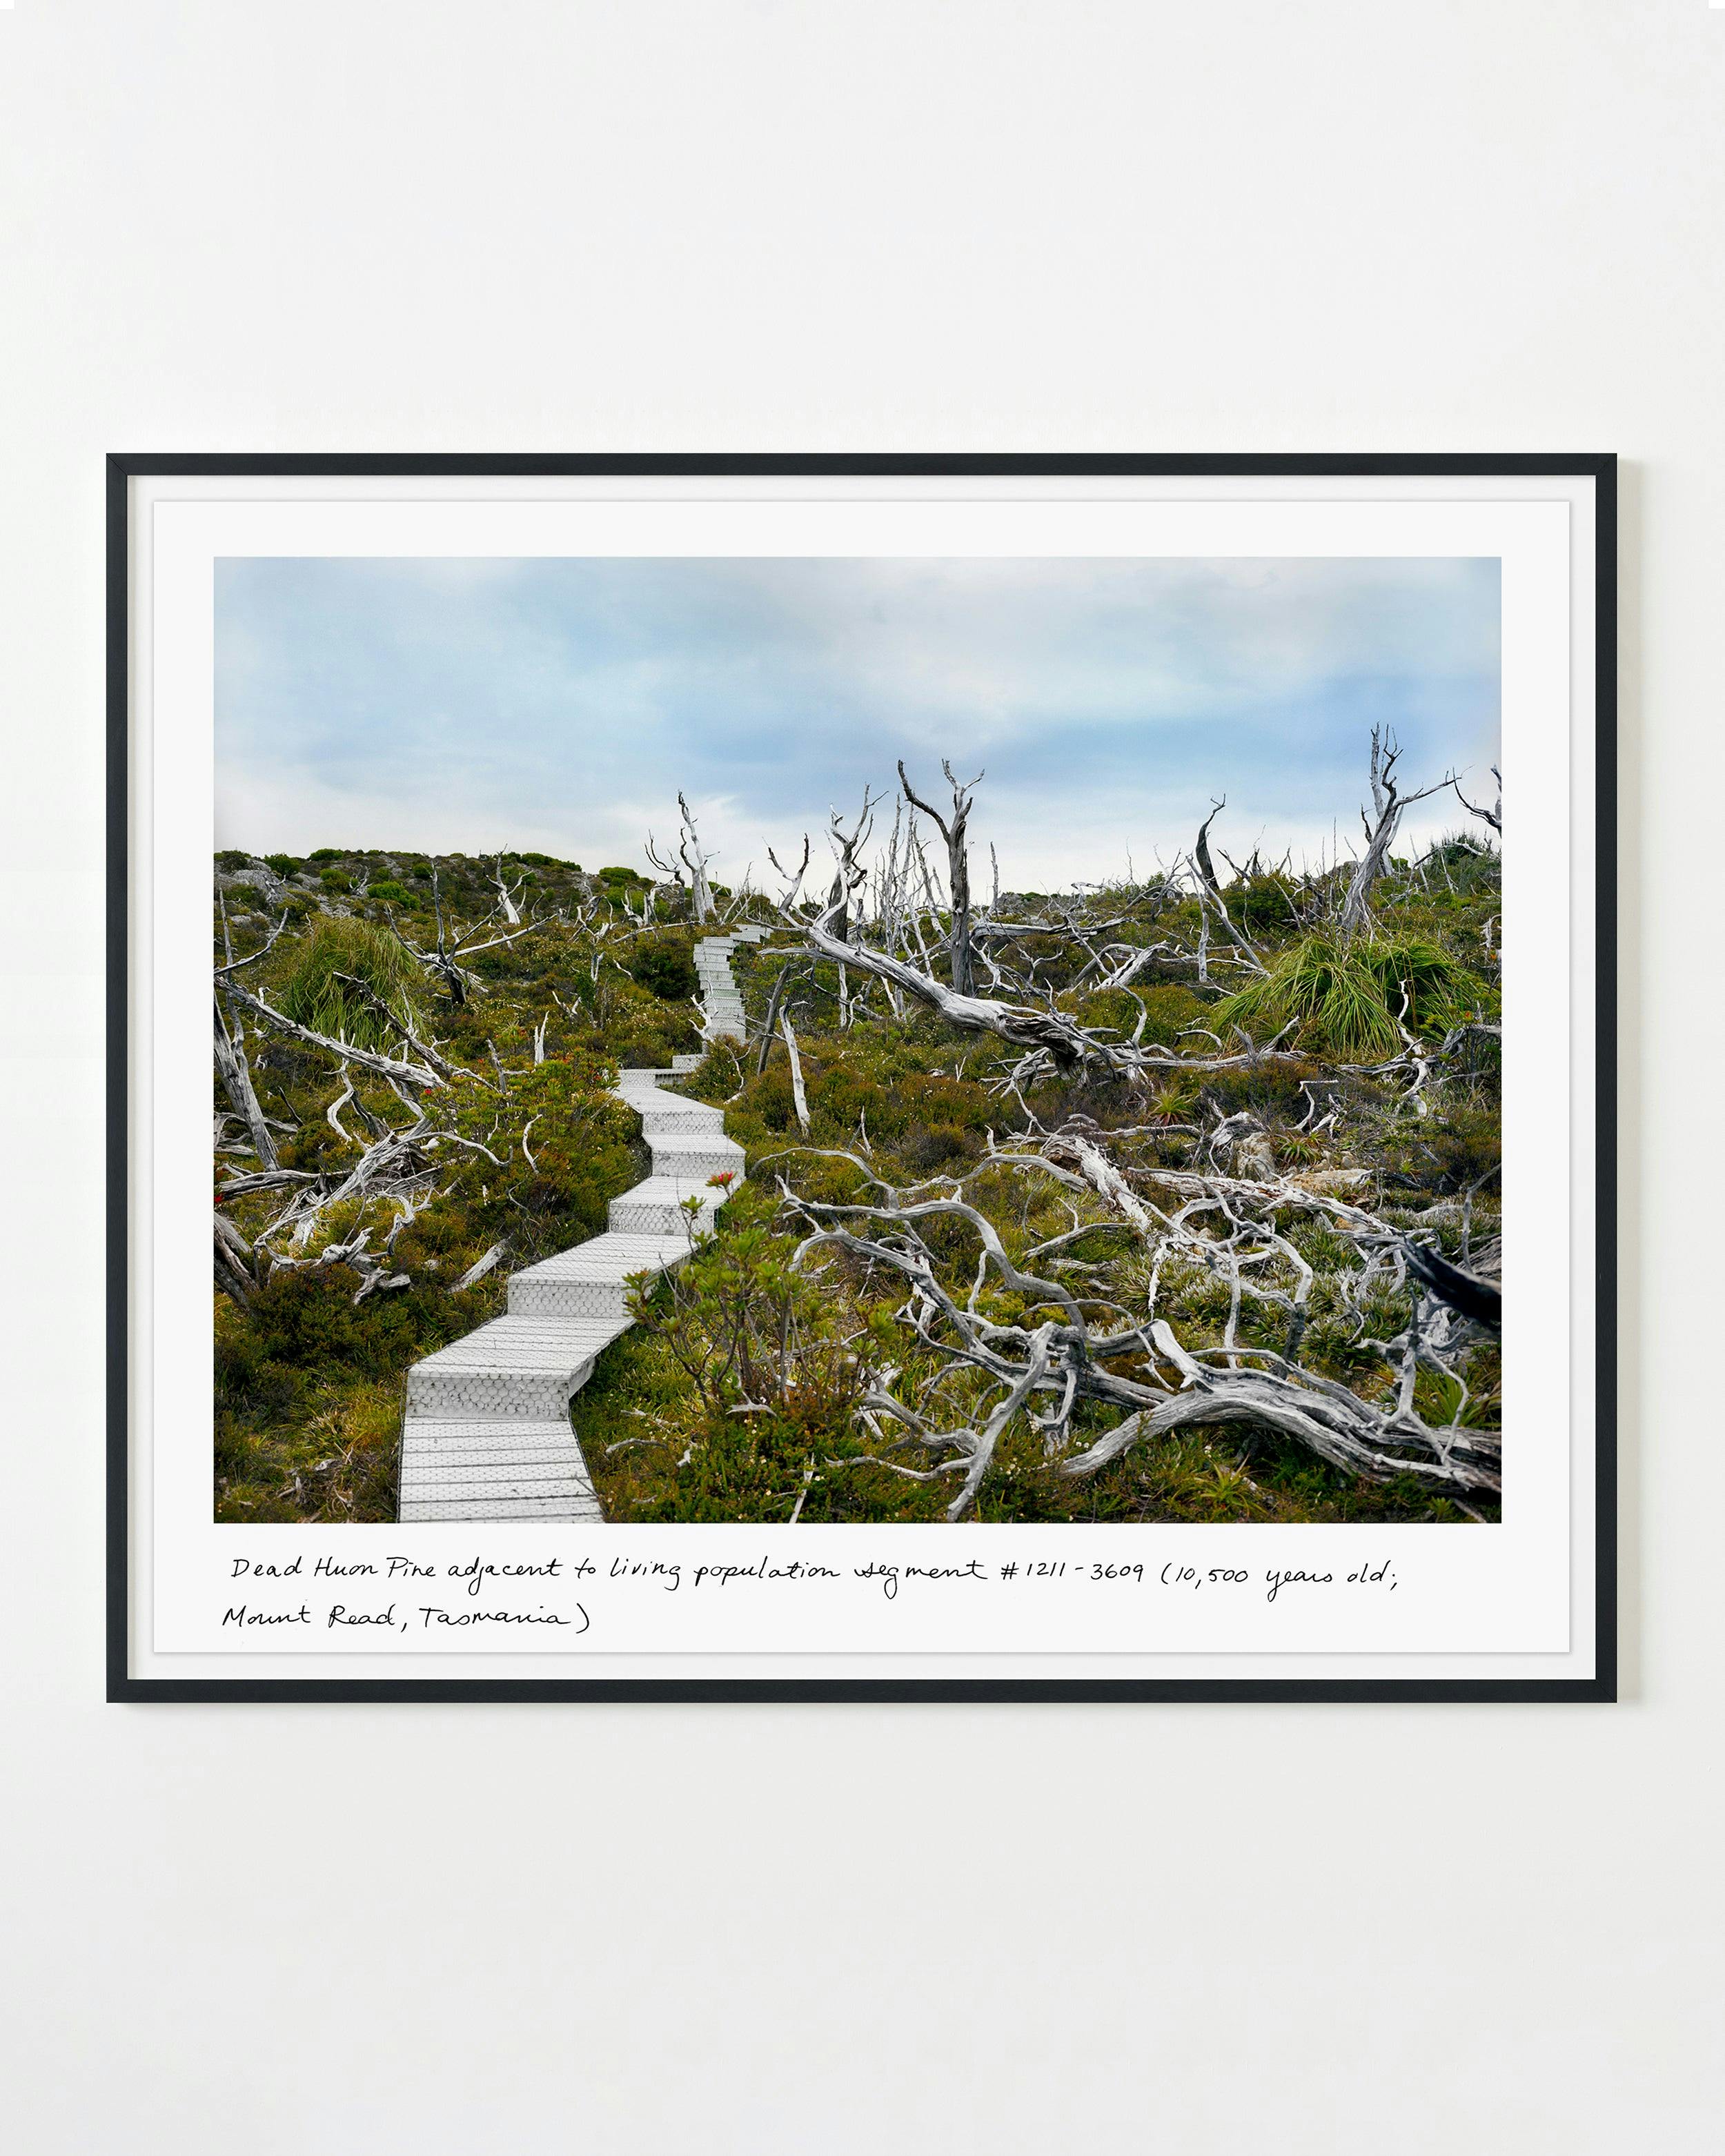 Photography by Rachel Sussman titled "Dead Huon Pine adjacent to living population segment #1211- 3609 (10,500 years o".